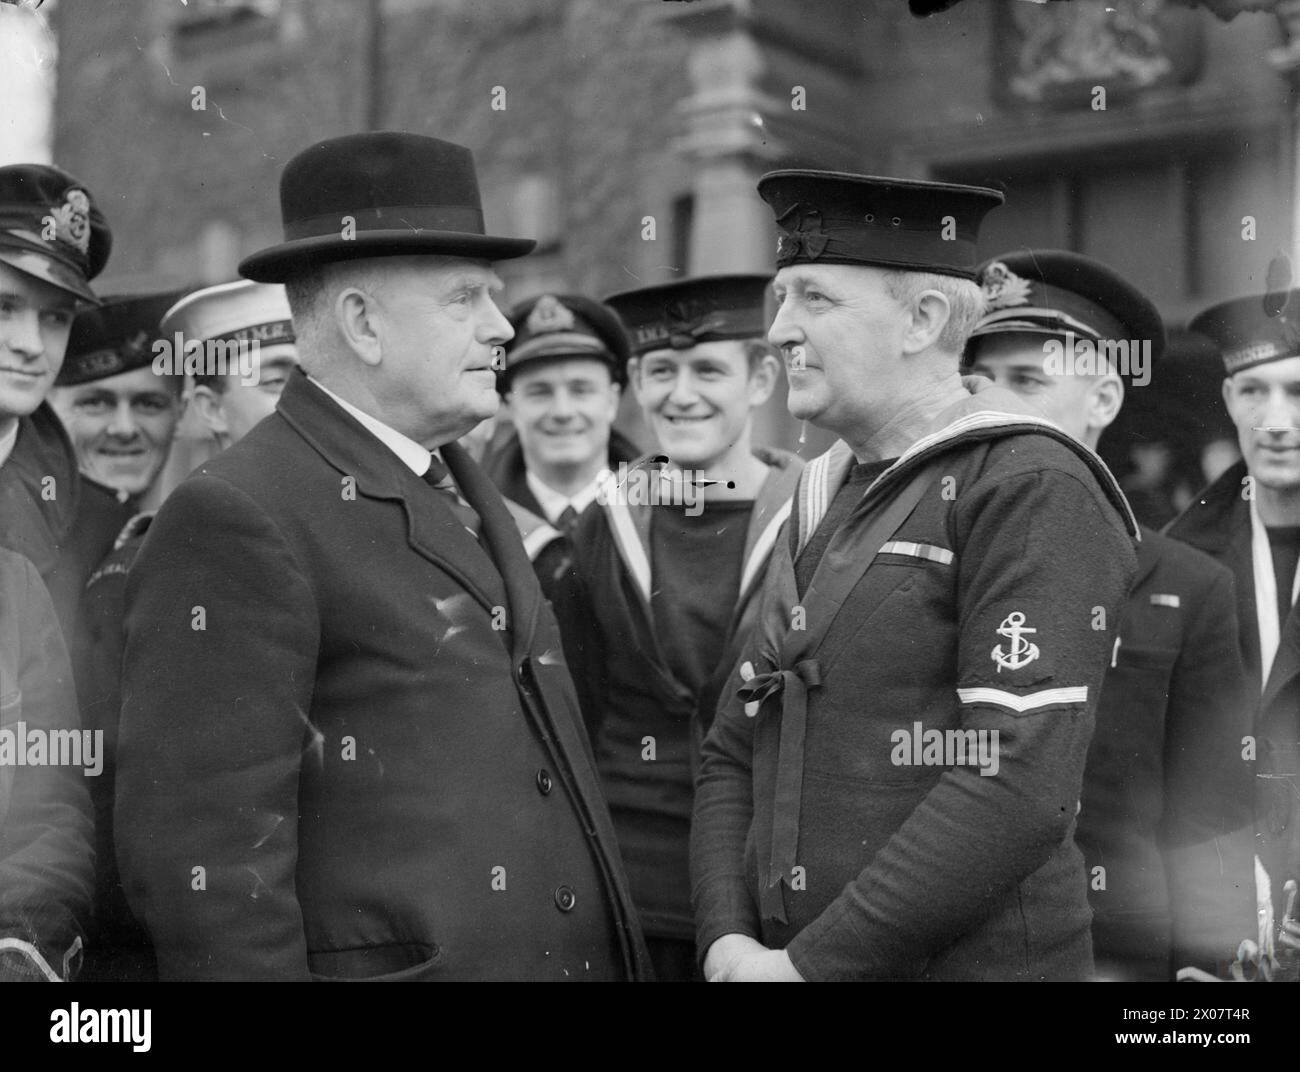 HIGH COMMISSIONER VISITS NEW ZEALANDERS AT PORTSMOUTH. 4 DECEMBER 1943. MR W J JORDAN, NEW ZEALAND HIGH COMMISSIONER, ACCOMPANIED BY MR S R SKINNER, OFFICER FOR NEW ZEALAND NAVAL AFFAIRS IN LONDON, HE MET AND TALKED TO NEW ZEALANDERS SERVING IN HM SHIPS. - Mr Jordan talking to 46 year-old Leading Stoker James Cameron Anson, who left Wellington, New Zealand 20 years ago to go to South Africa, where in 1940 he joined the South African Navy Stock Photo